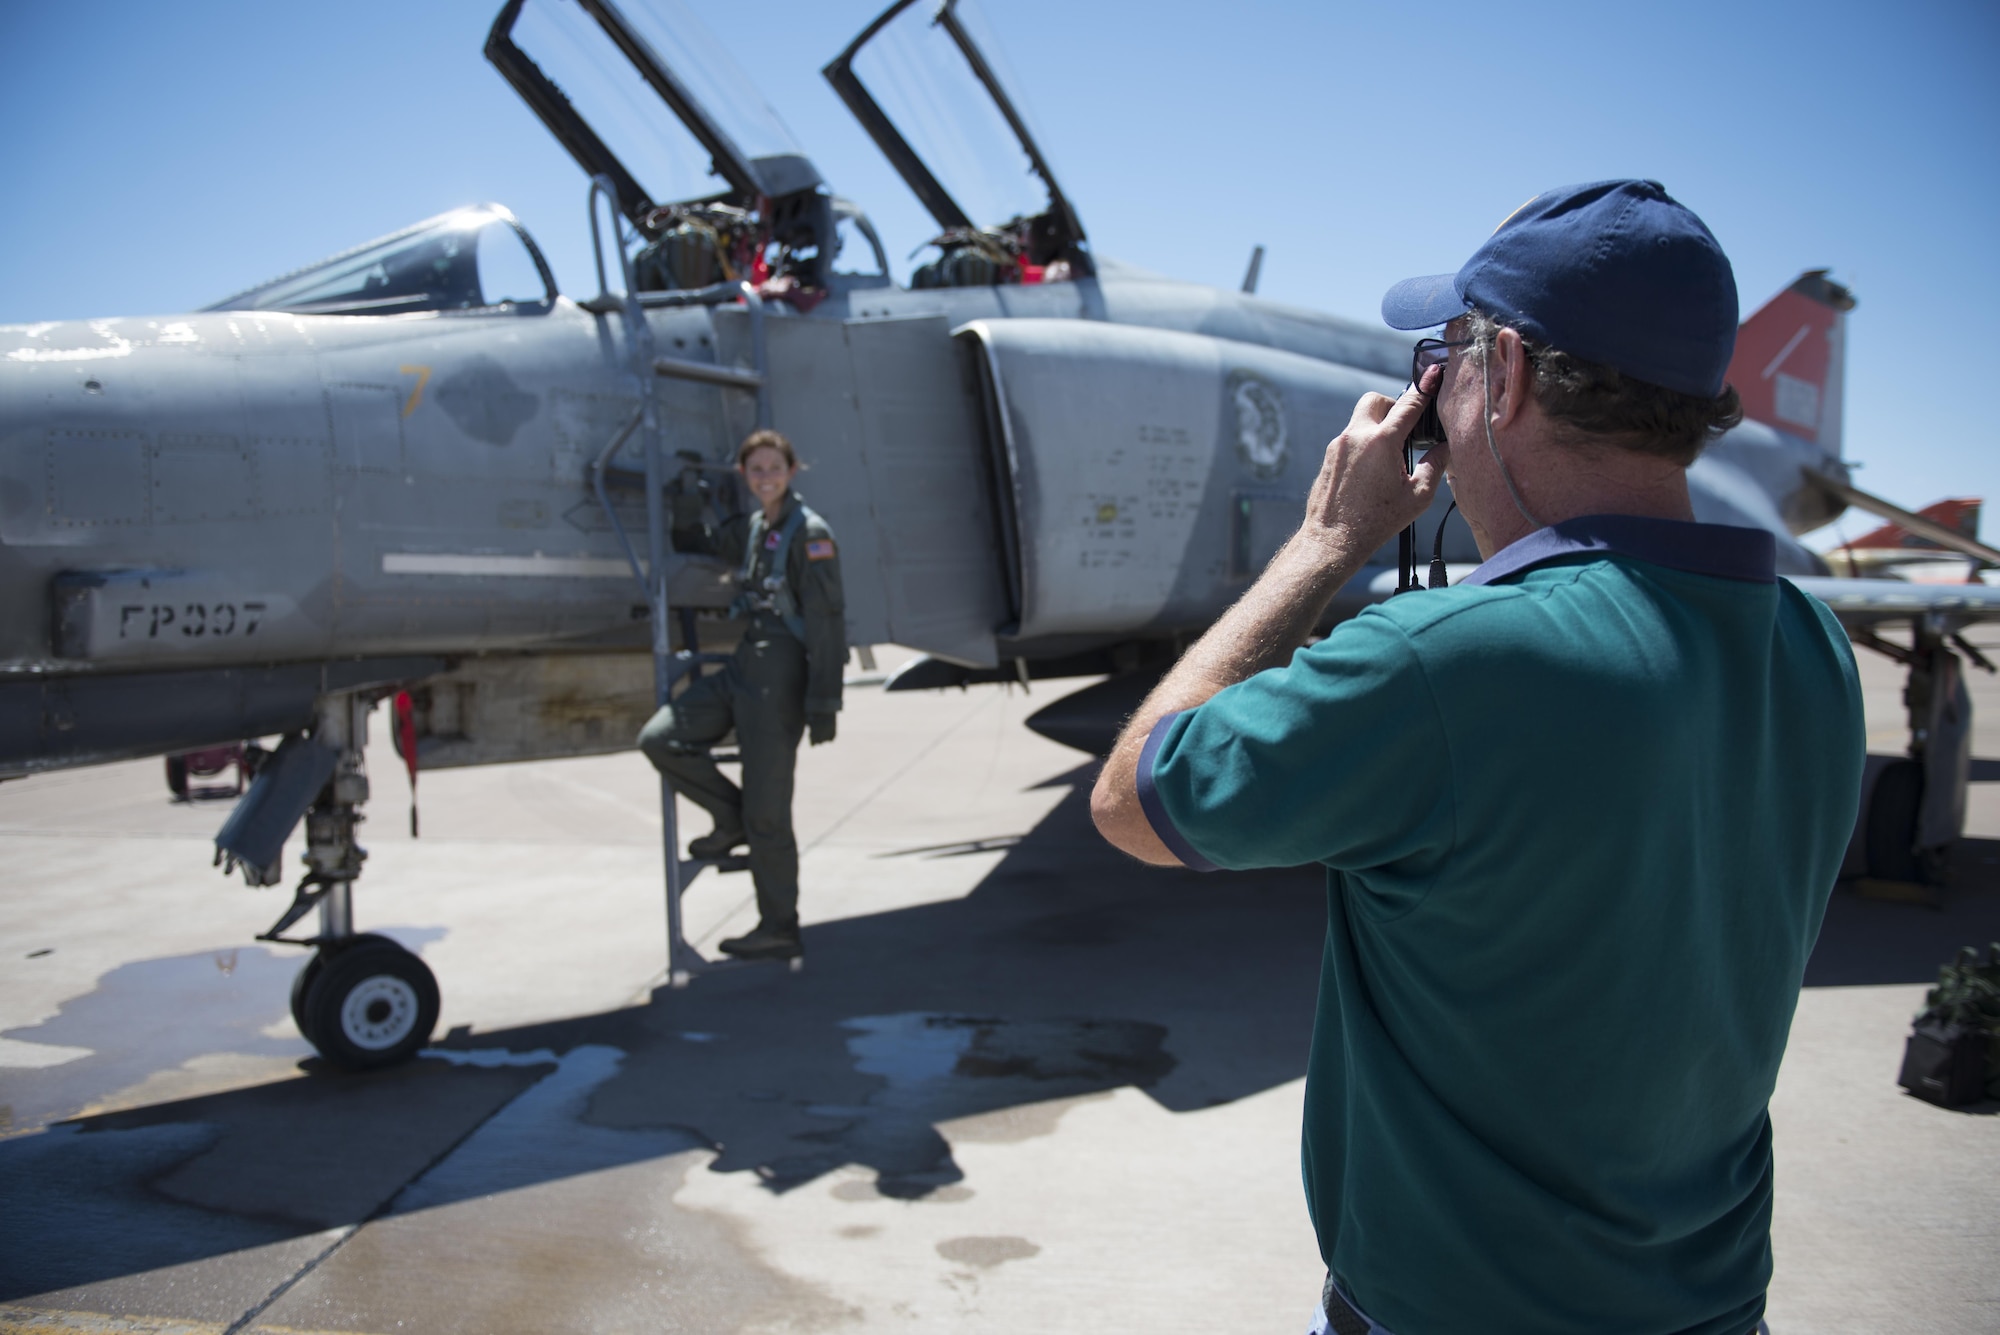 Retired Col. David takes a photo of his daughter, Cadet 2nd Class Kaitlyn, standing next to an F-4 Phantom on July 12, 2016 at Holloman Air Force Base, N.M. David came to surprise his daughter, a junior at the Air Force Academy, after her first flight in a fighter jet with the 96th Test Group Detachment 1. (Last names are being withheld due to operational requirements. U.S. Air Force photo by Airman 1st Class Randahl J. Jenson) 